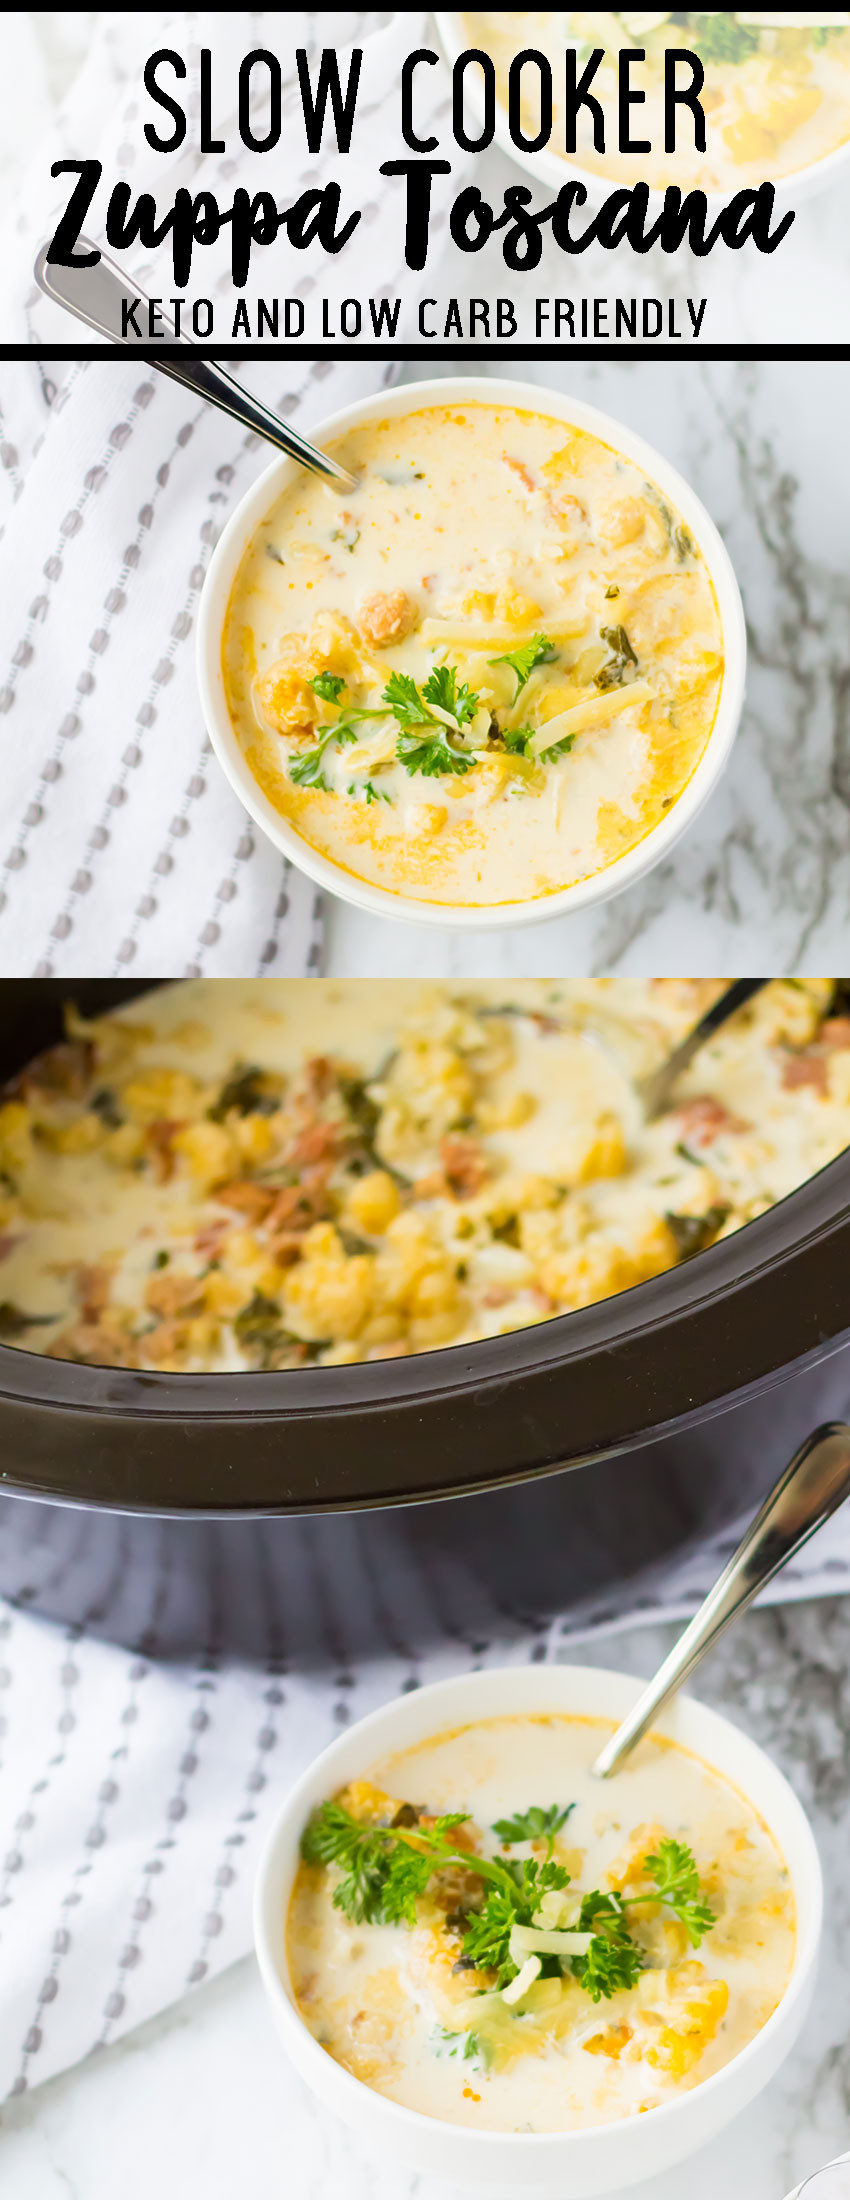 Slow Cooker Keto Zuppa Toscana
 Slow Cooker Zuppa Toscana low carb keto friendly Easy